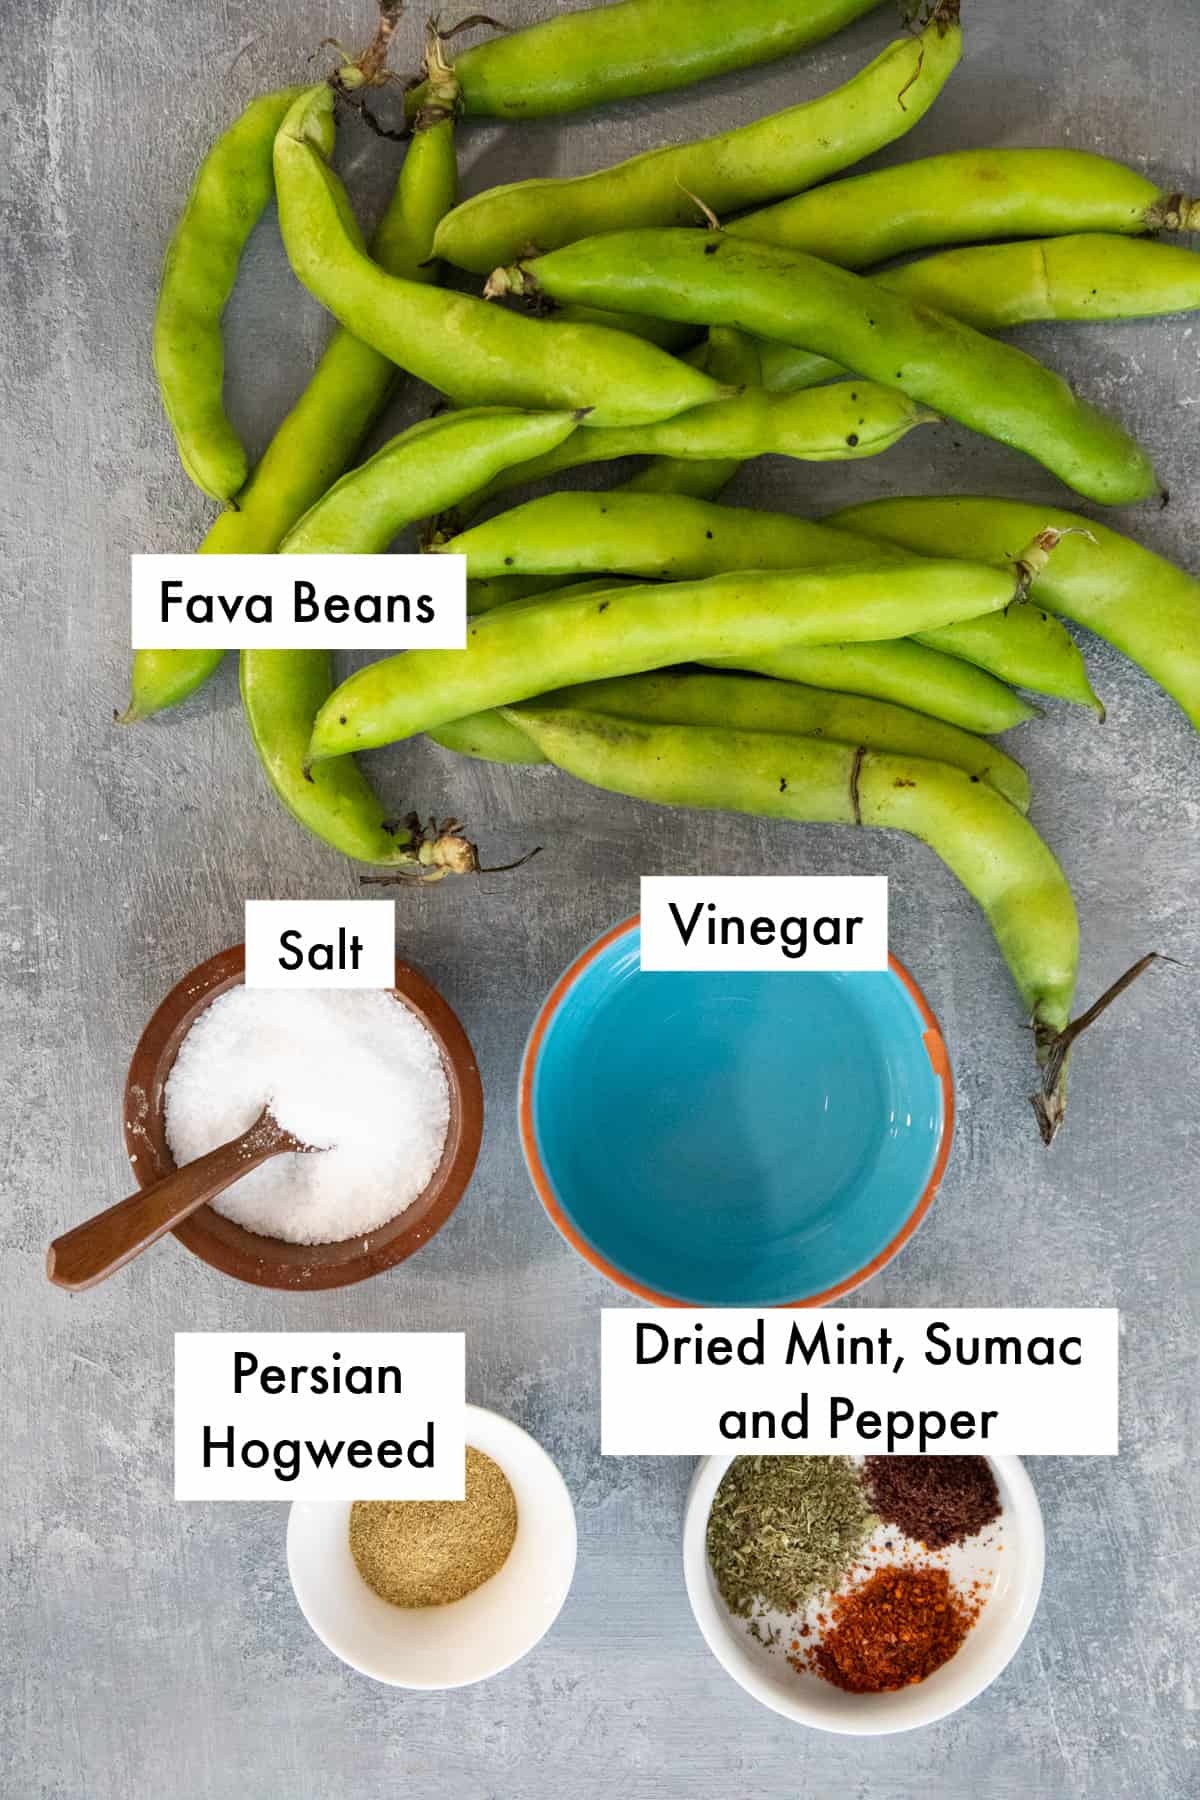 To make Persian fava beans recipe you need the beans, salt, vinegar and spices. 